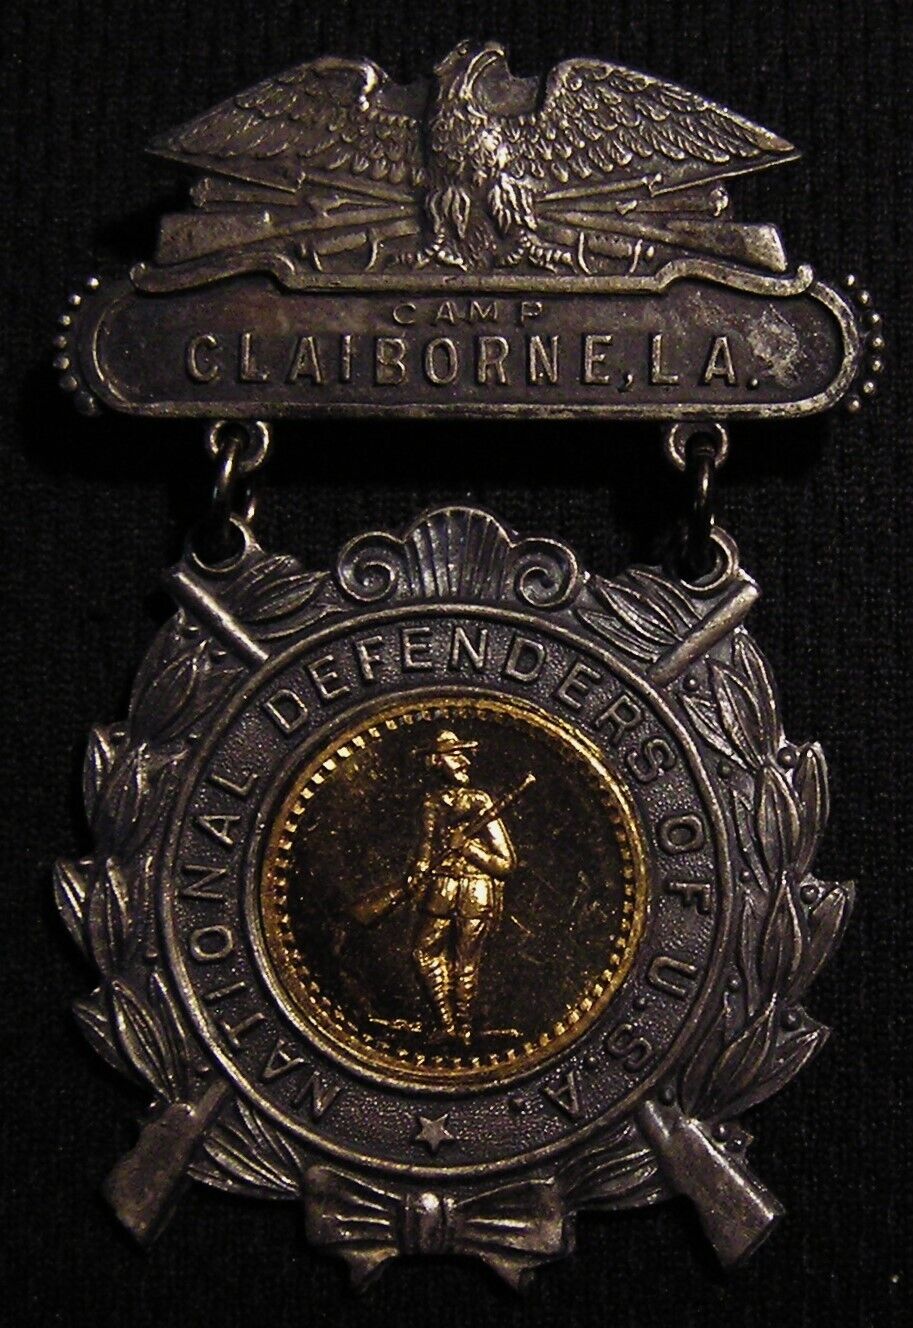 WWII ERA CAMP CLAIBORNE LA NATIONAL DEFENDERS OF THE USA MEDAL BADGE - US WW2